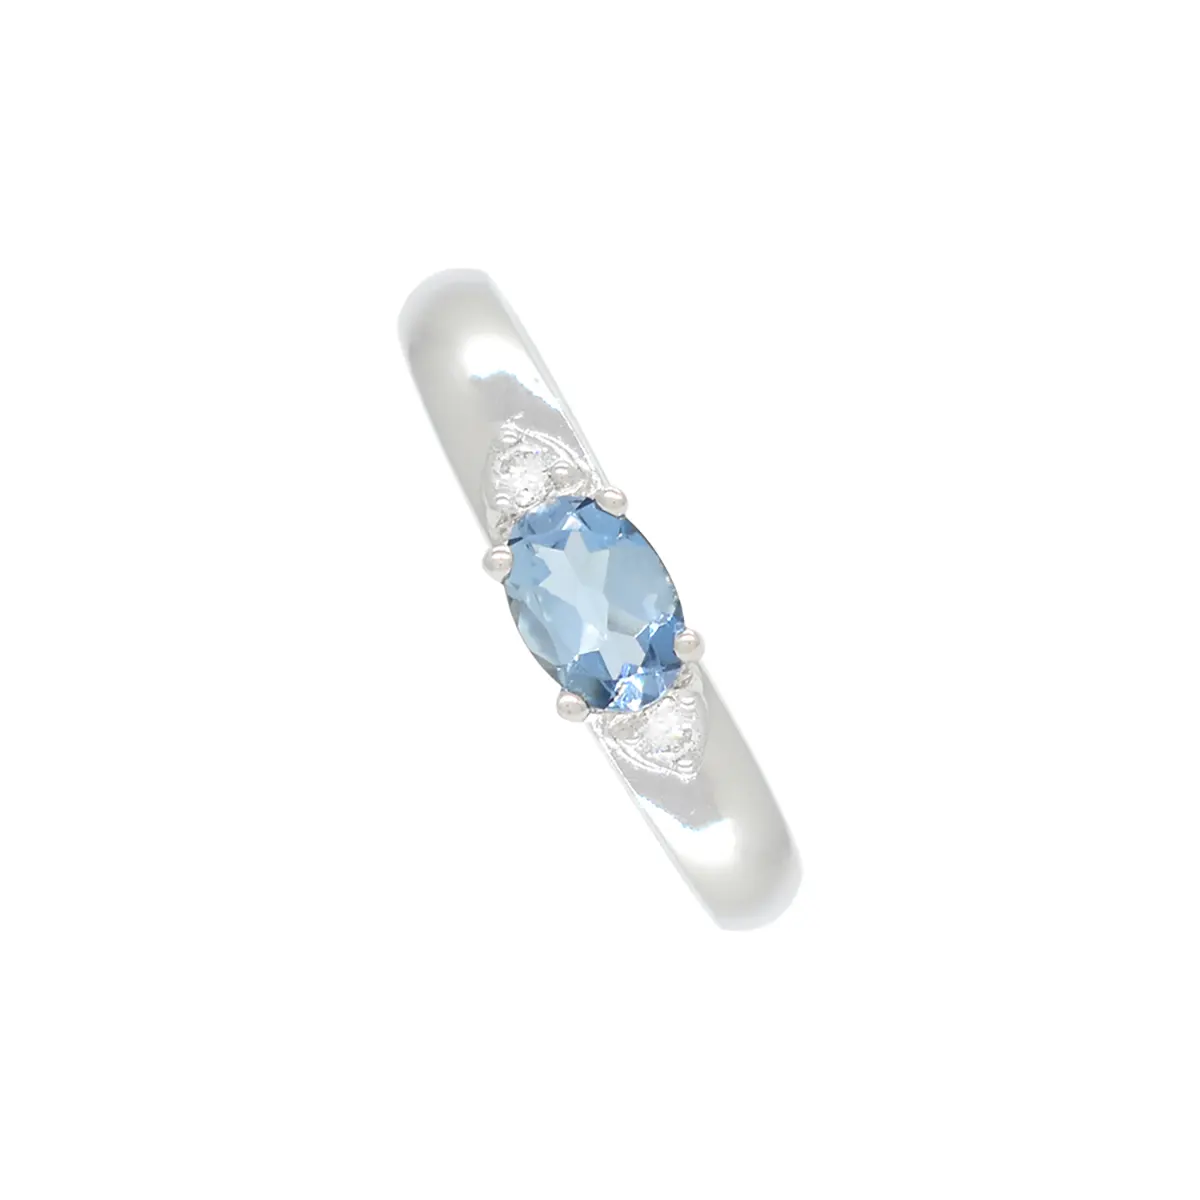 Aquamarine and diamond band ring in 18K white gold with 0.35 Ct. oval shape natural aquamarine and 0.04 Ct. total weight in 2 round cut diamonds